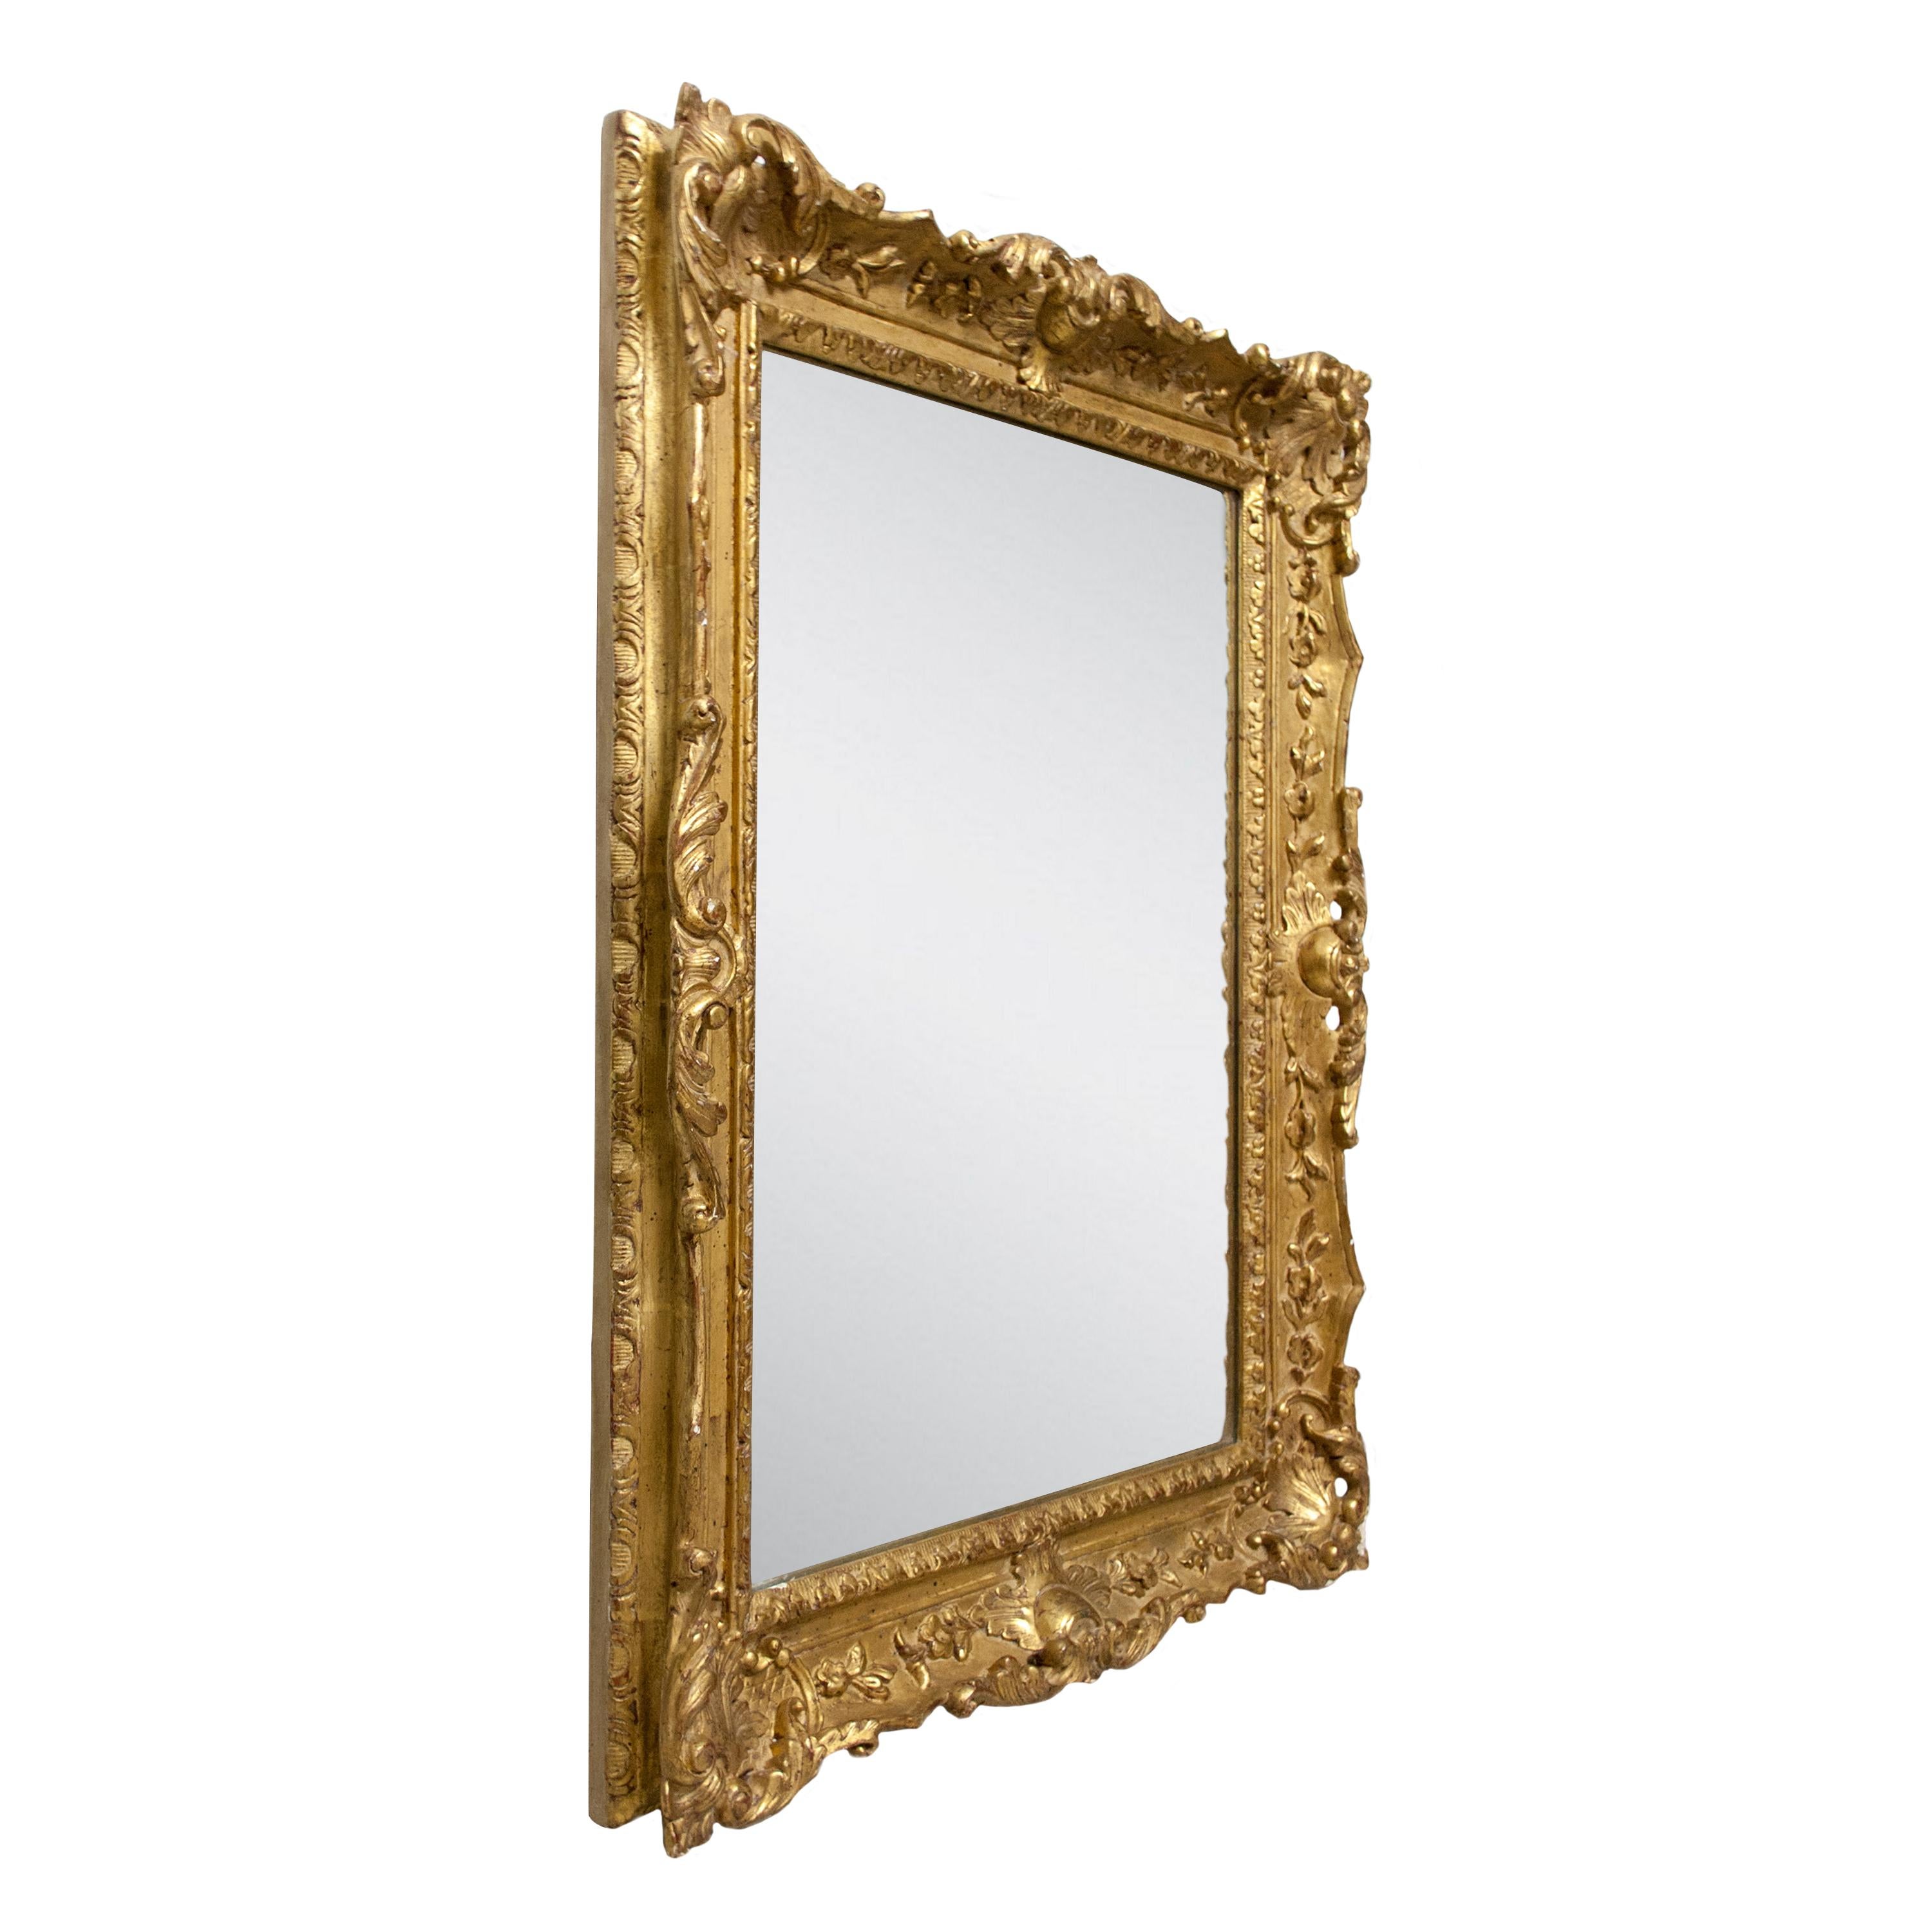 Neoclassical style handcrafted mirror. Rectangular hand carved wooden structure with gold foiled finish, Spain, 1970.